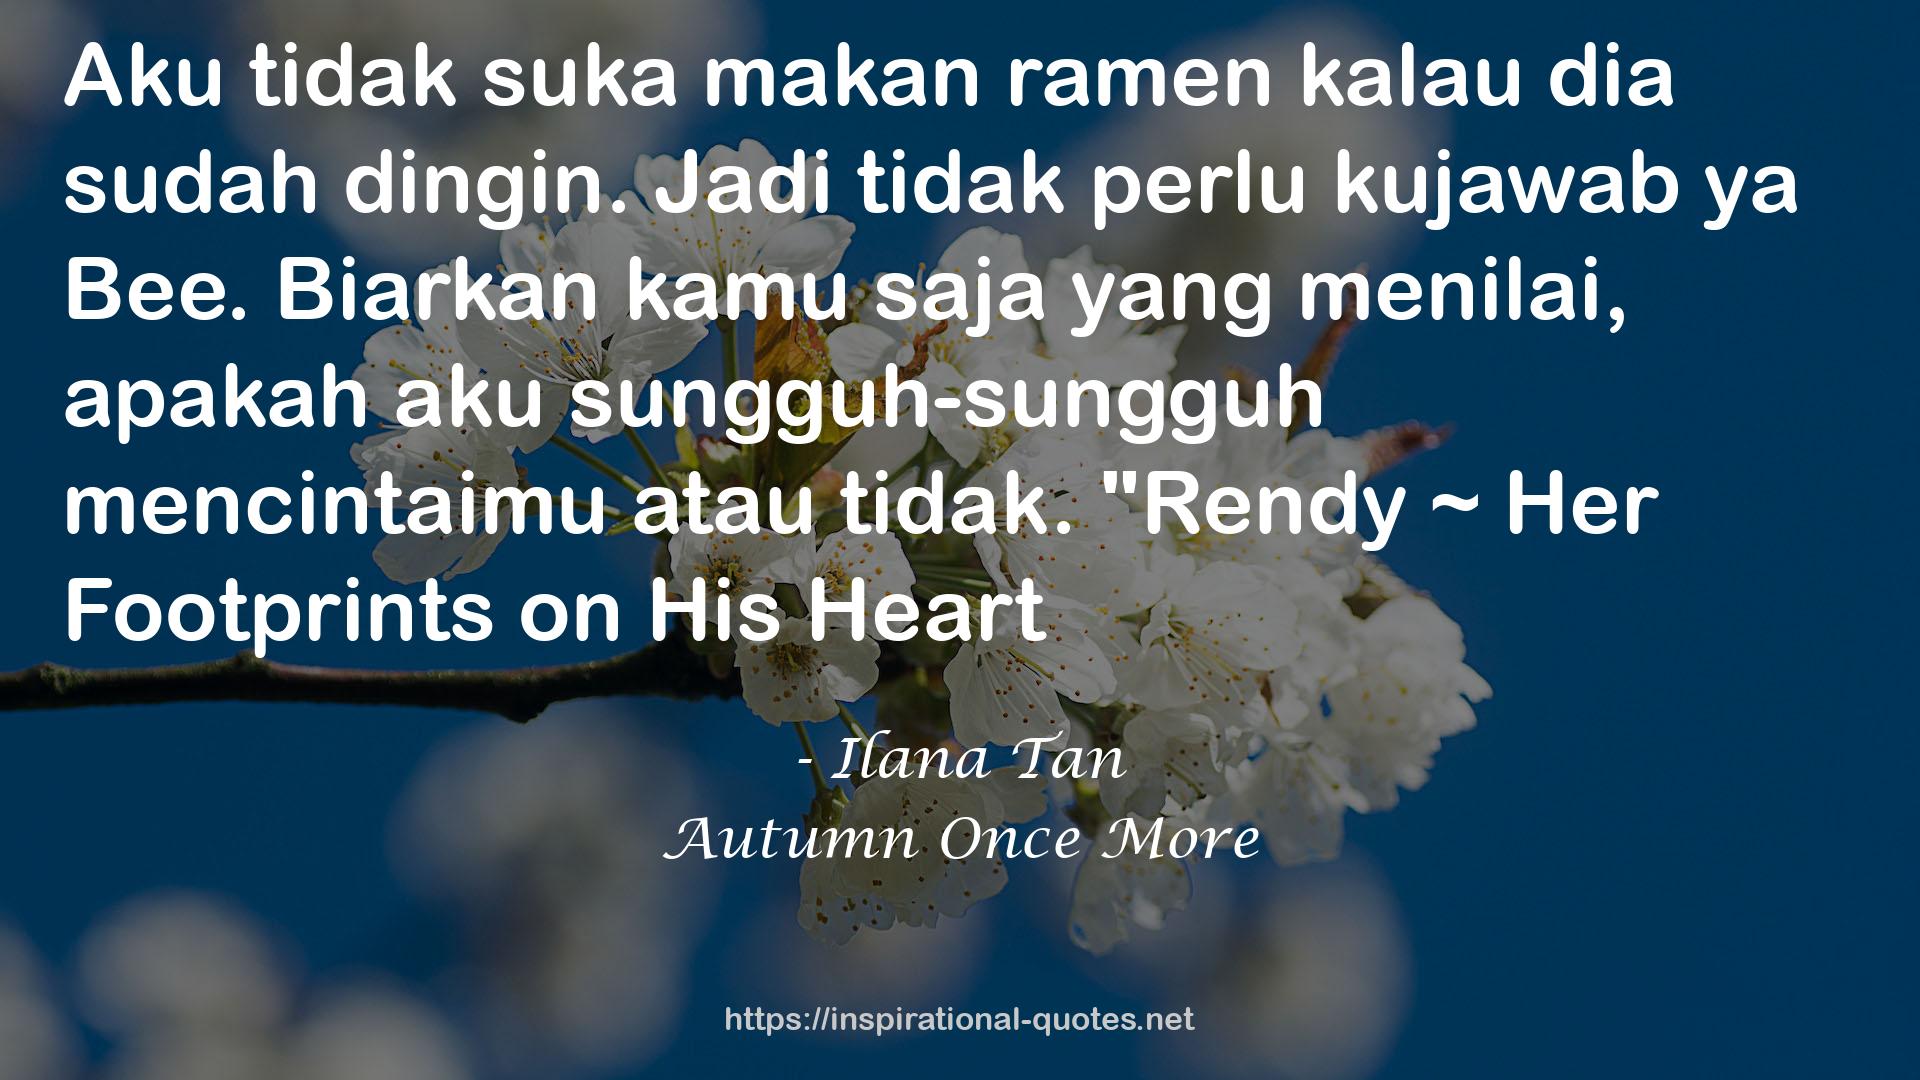 Autumn Once More QUOTES